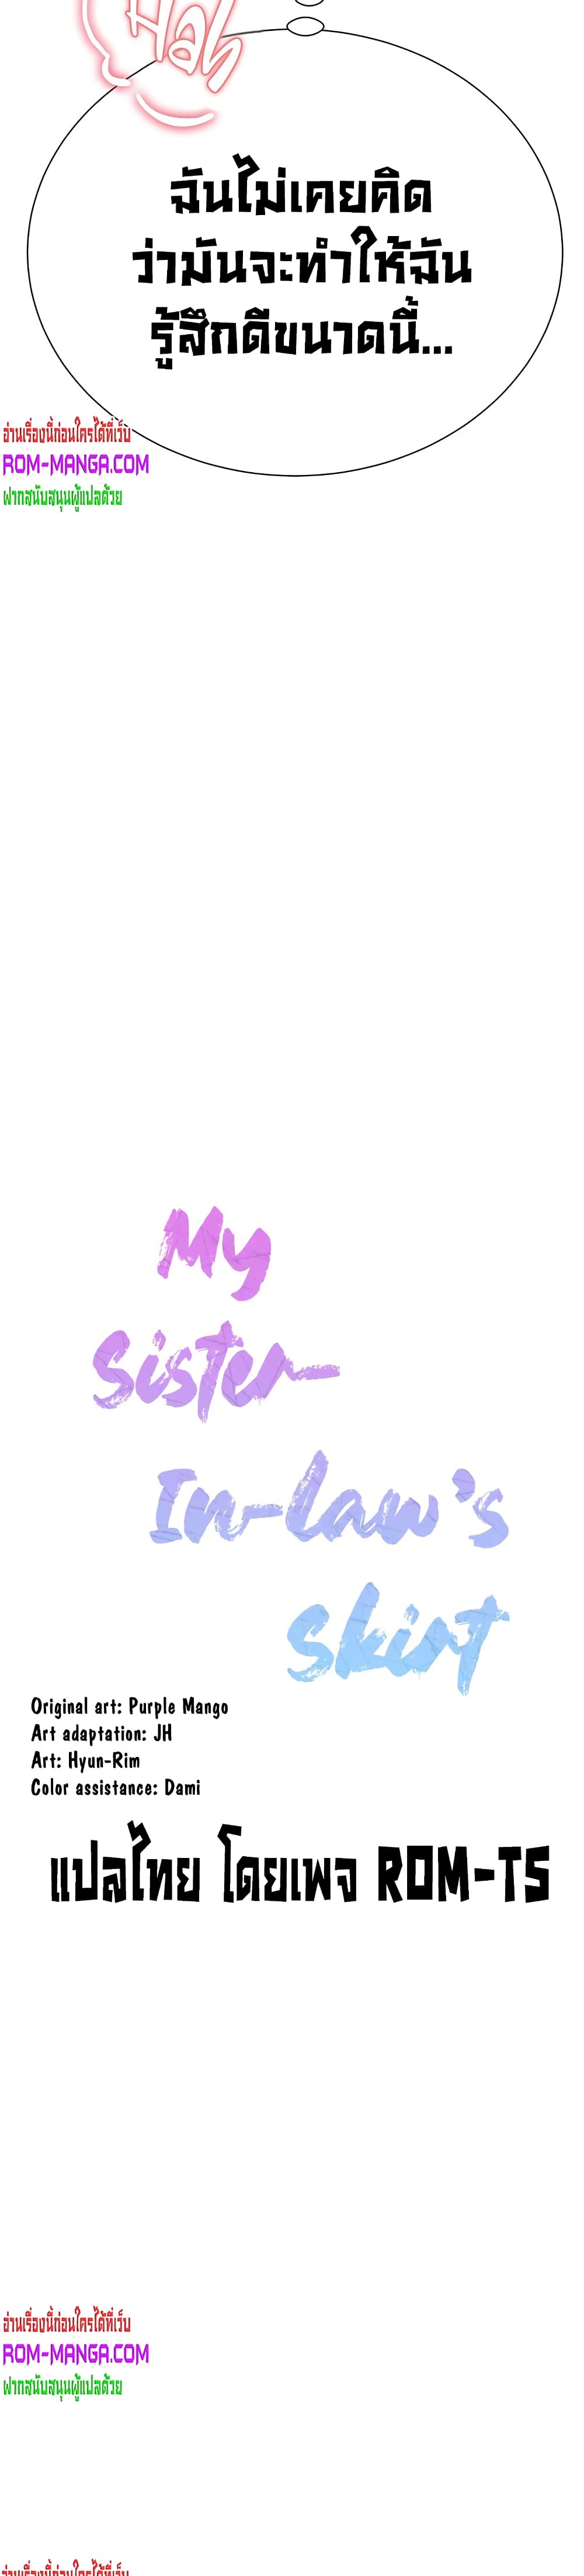 My Sister-in-law’s Skirt 23 ภาพที่ 4